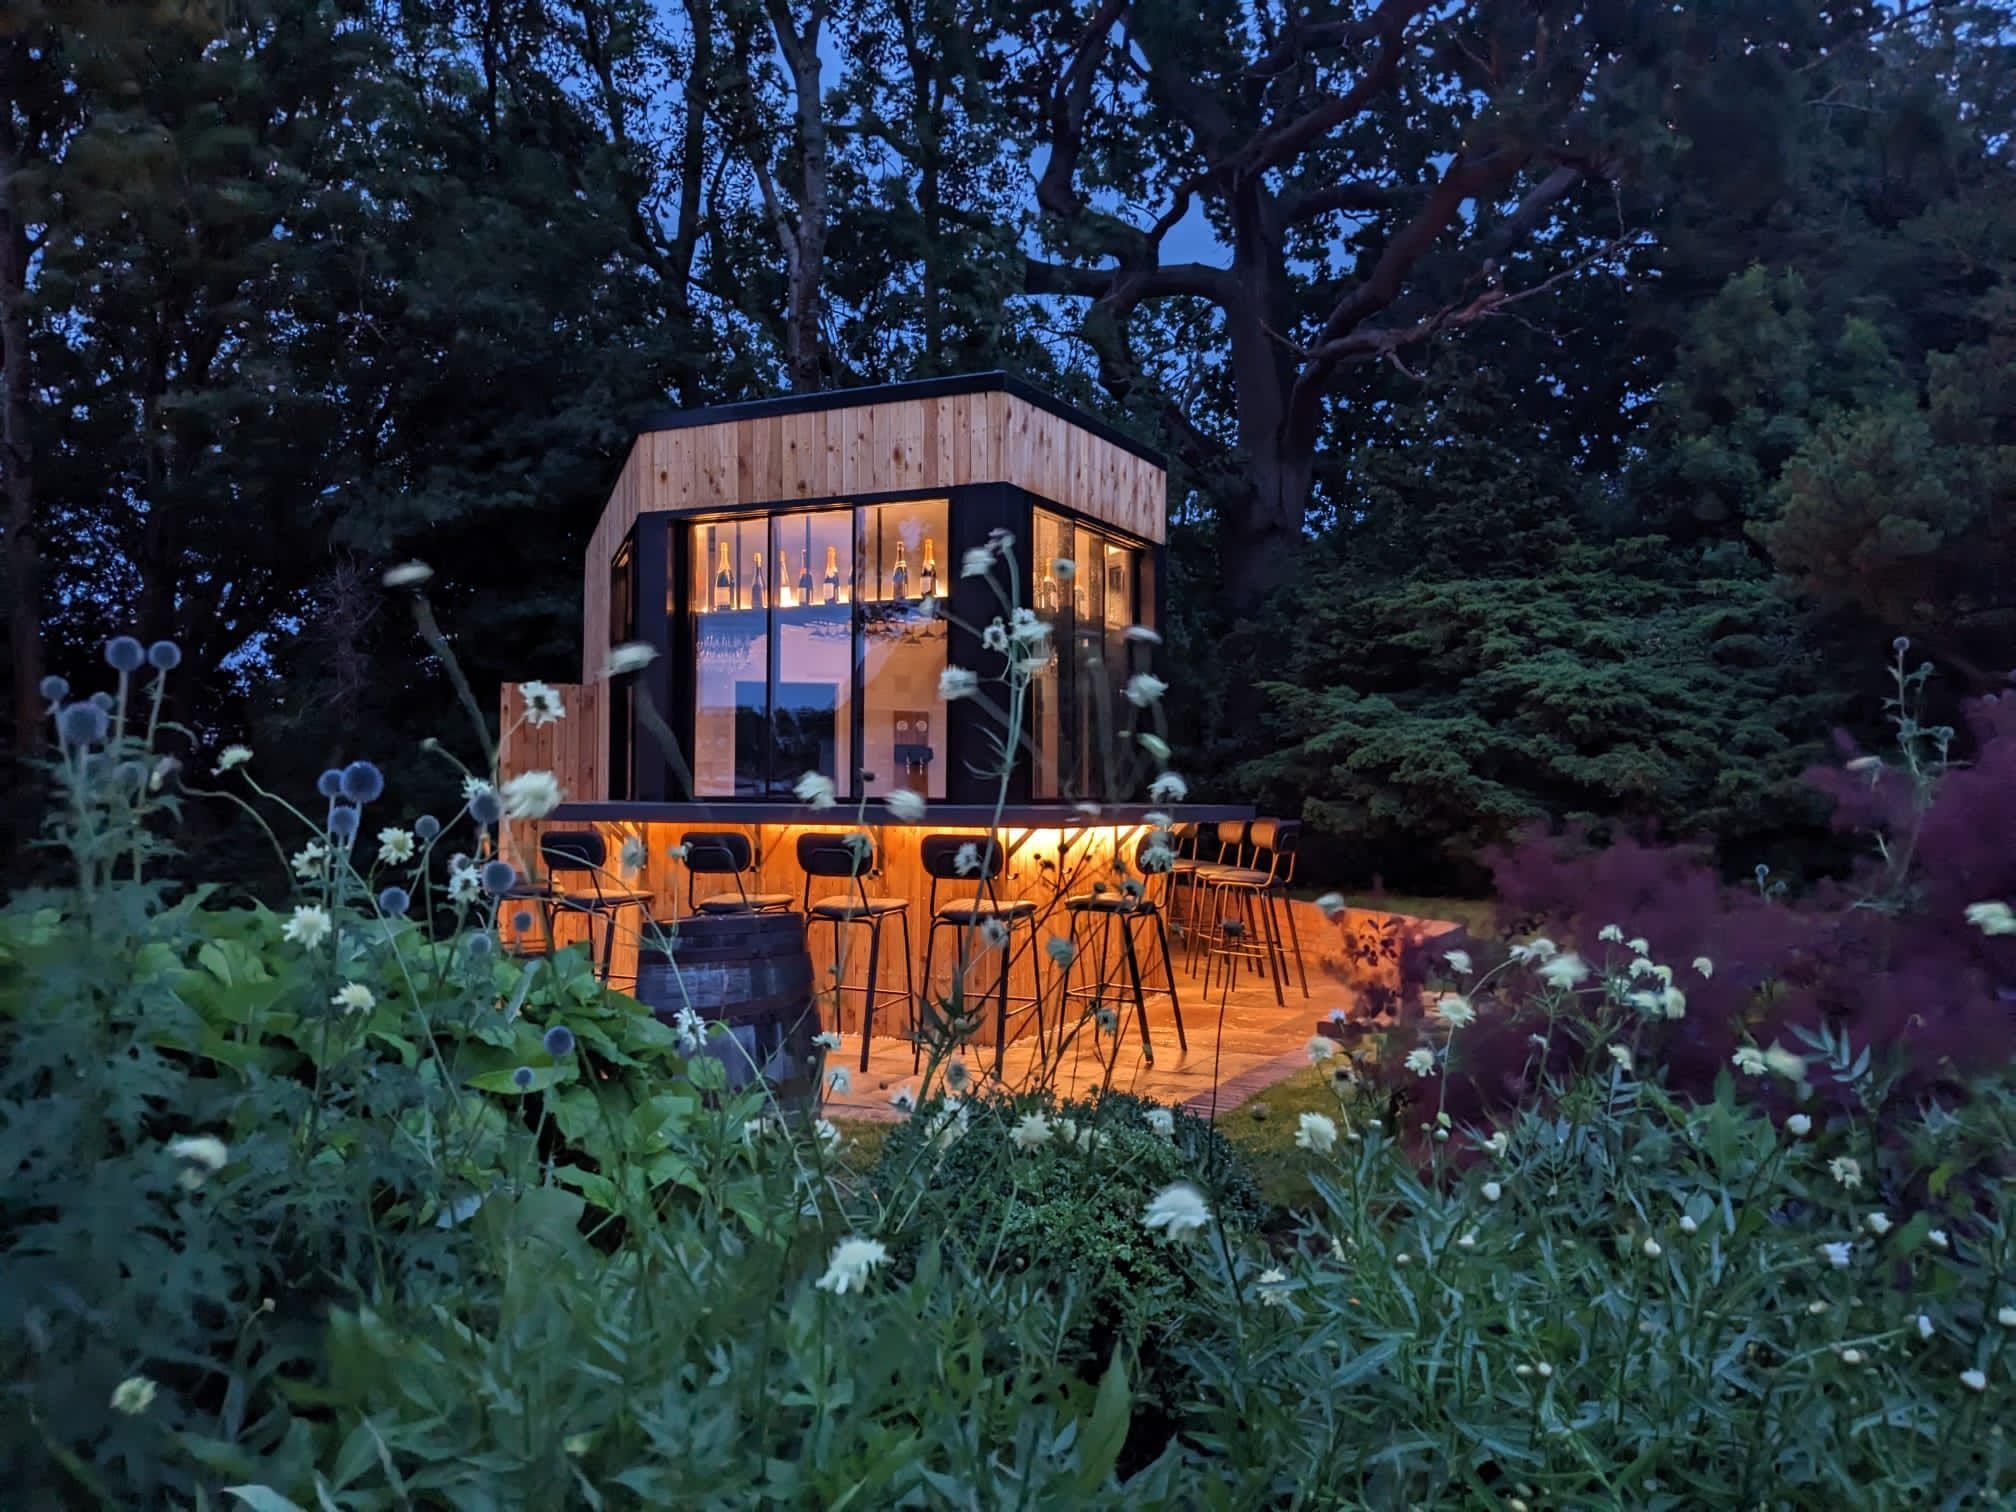 Pictured, a well lit garden bar nestled among the trees in the South Downs